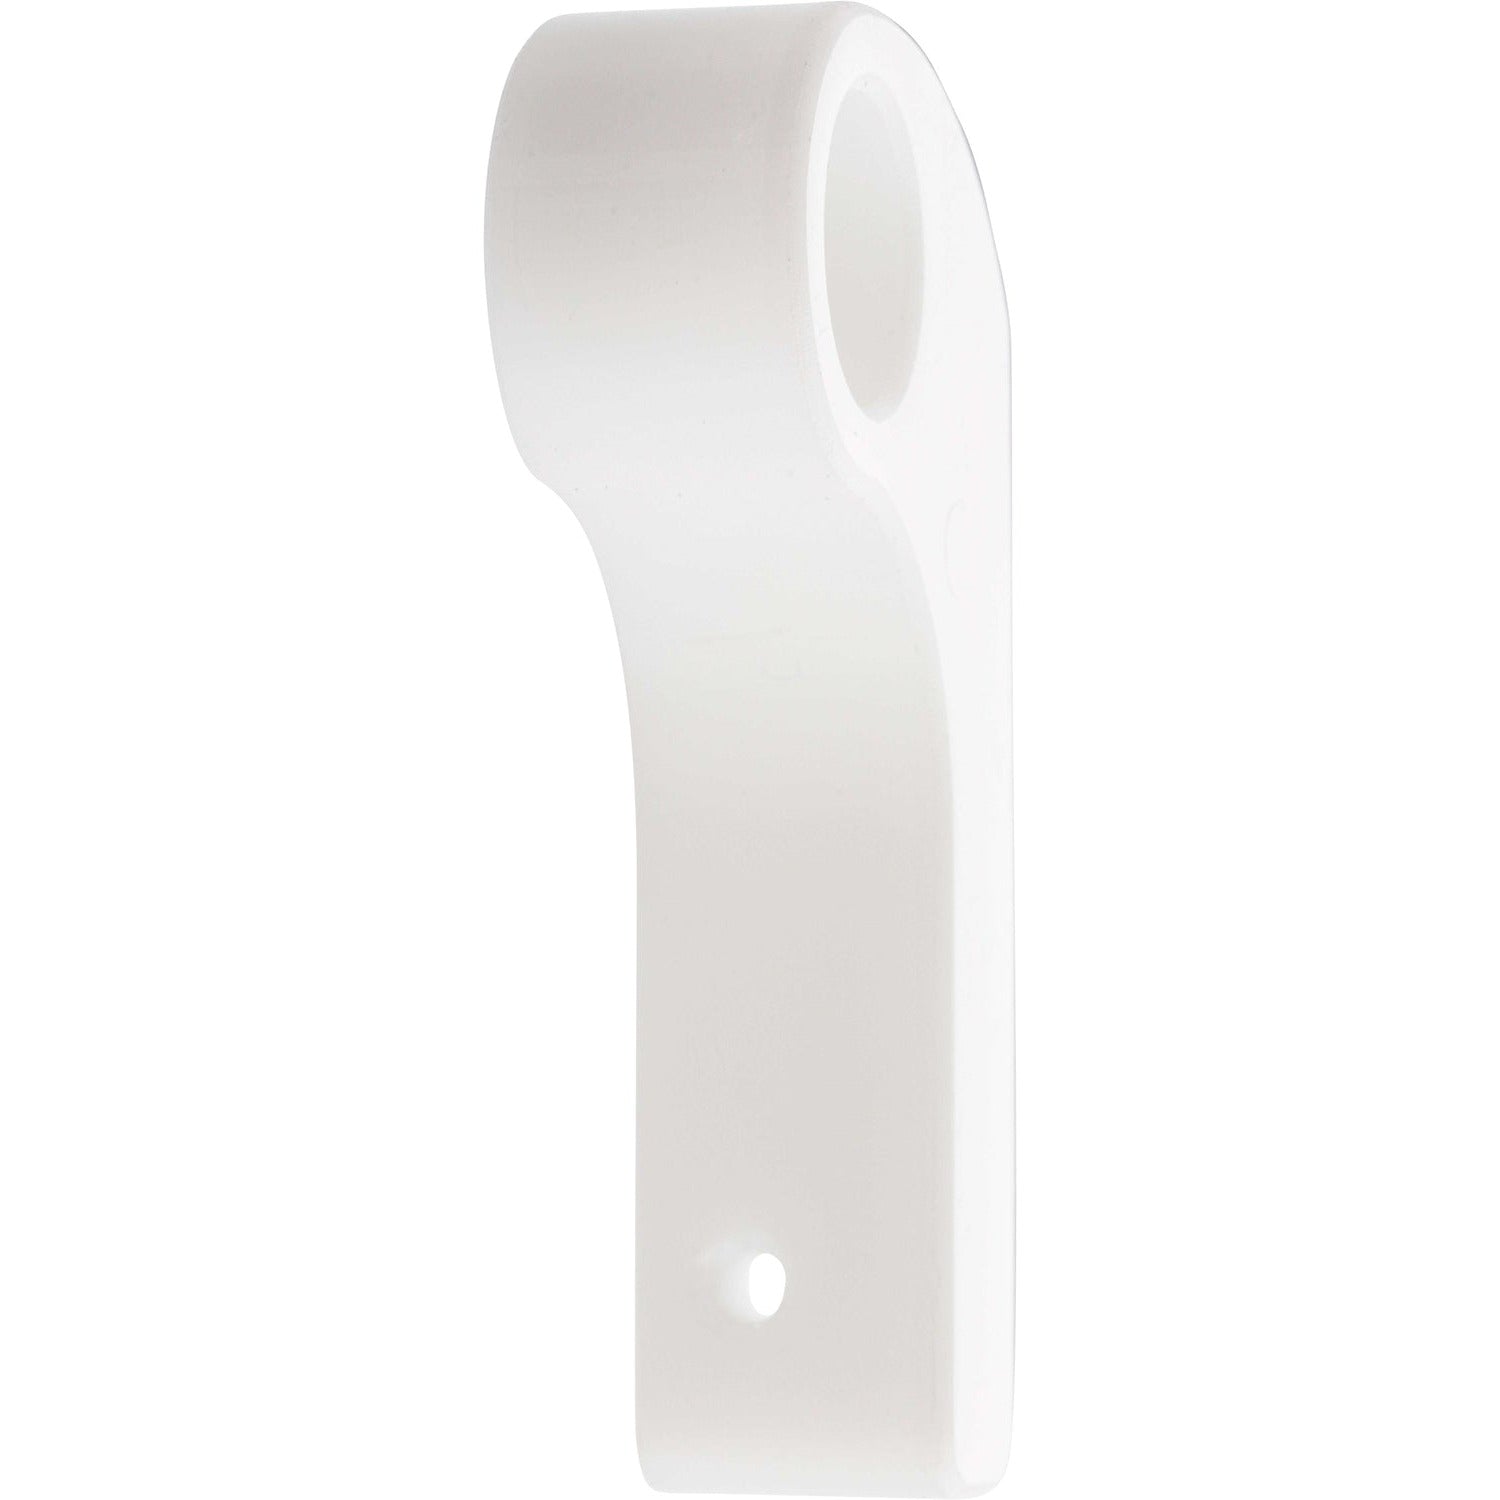 White plastic machined part with two threaded holes shown on white background. 